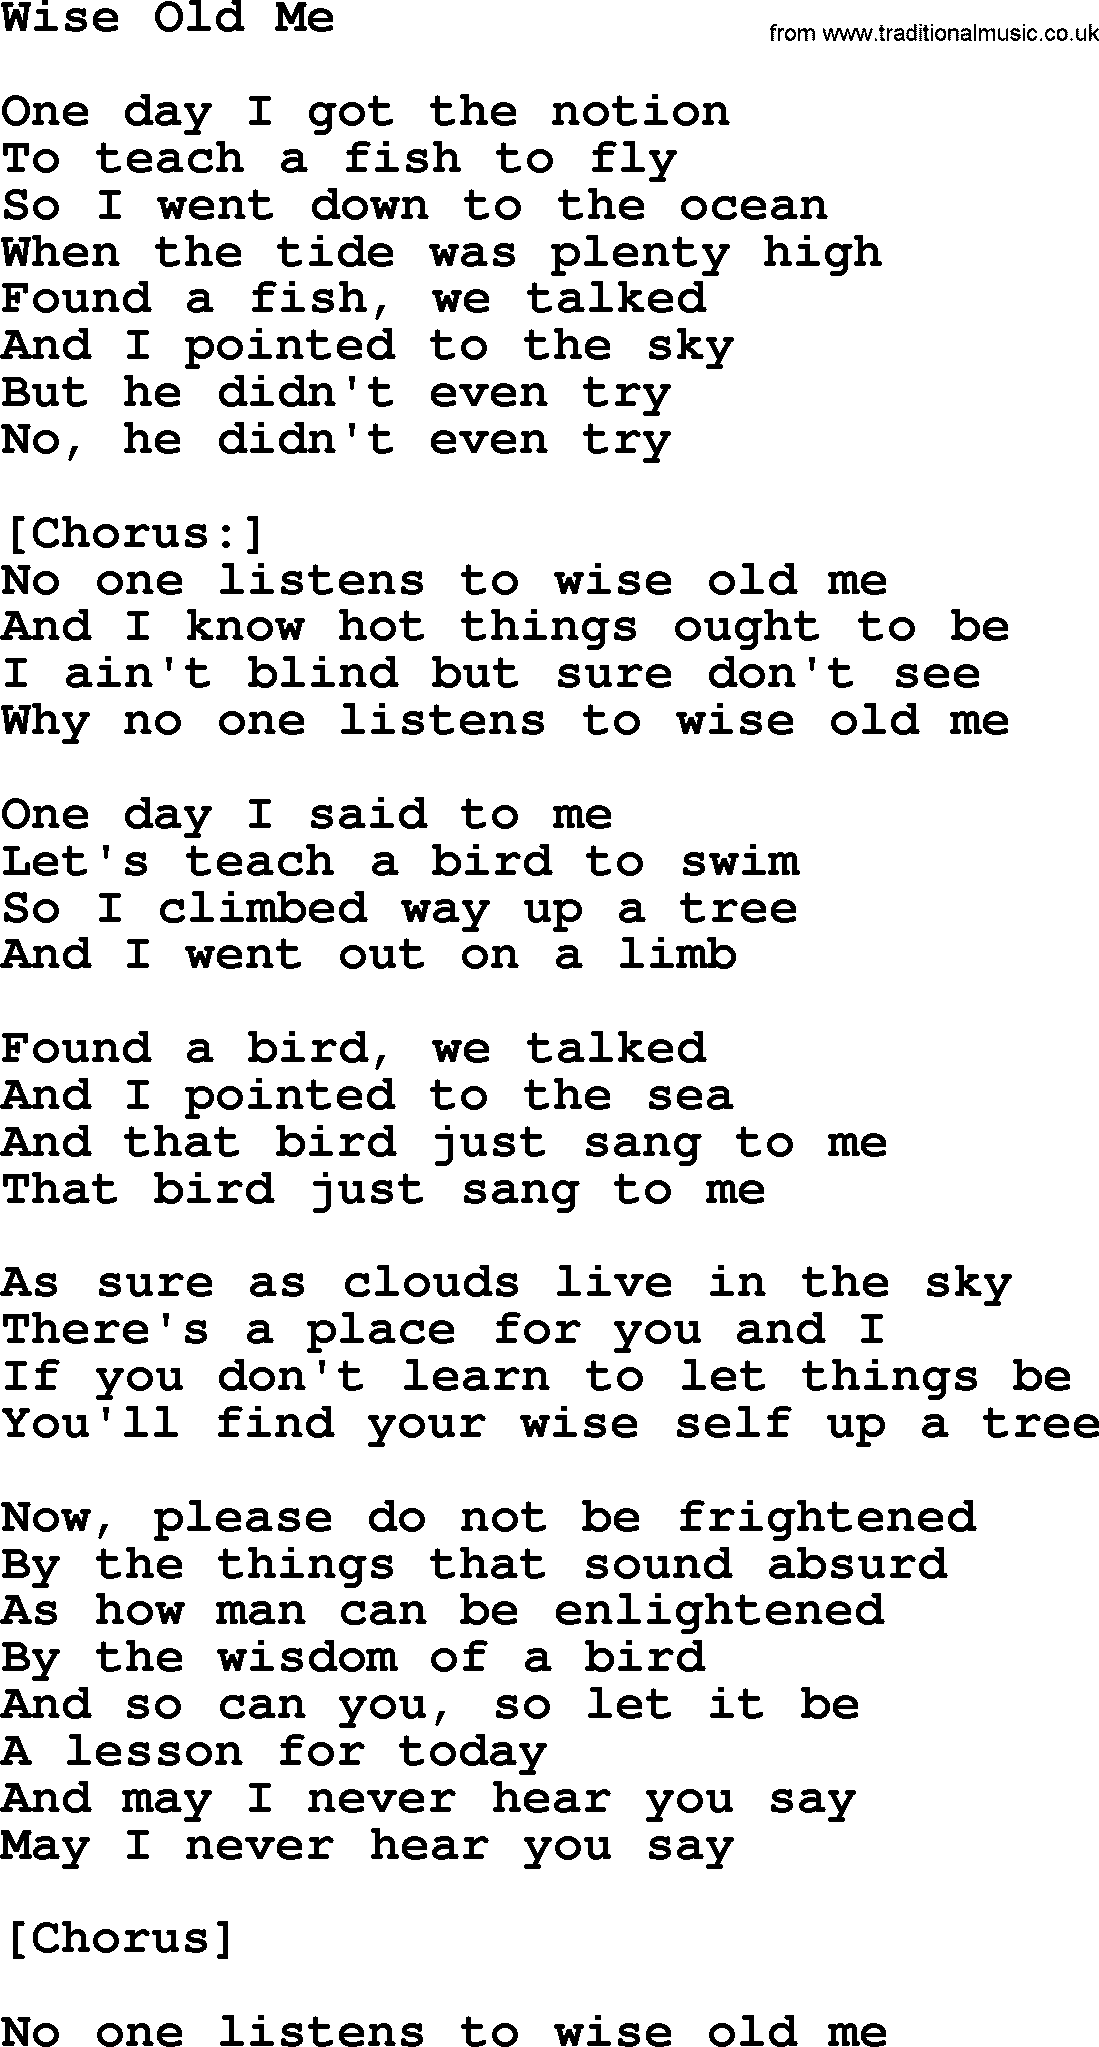 Willie Nelson song: Wise Old Me lyrics